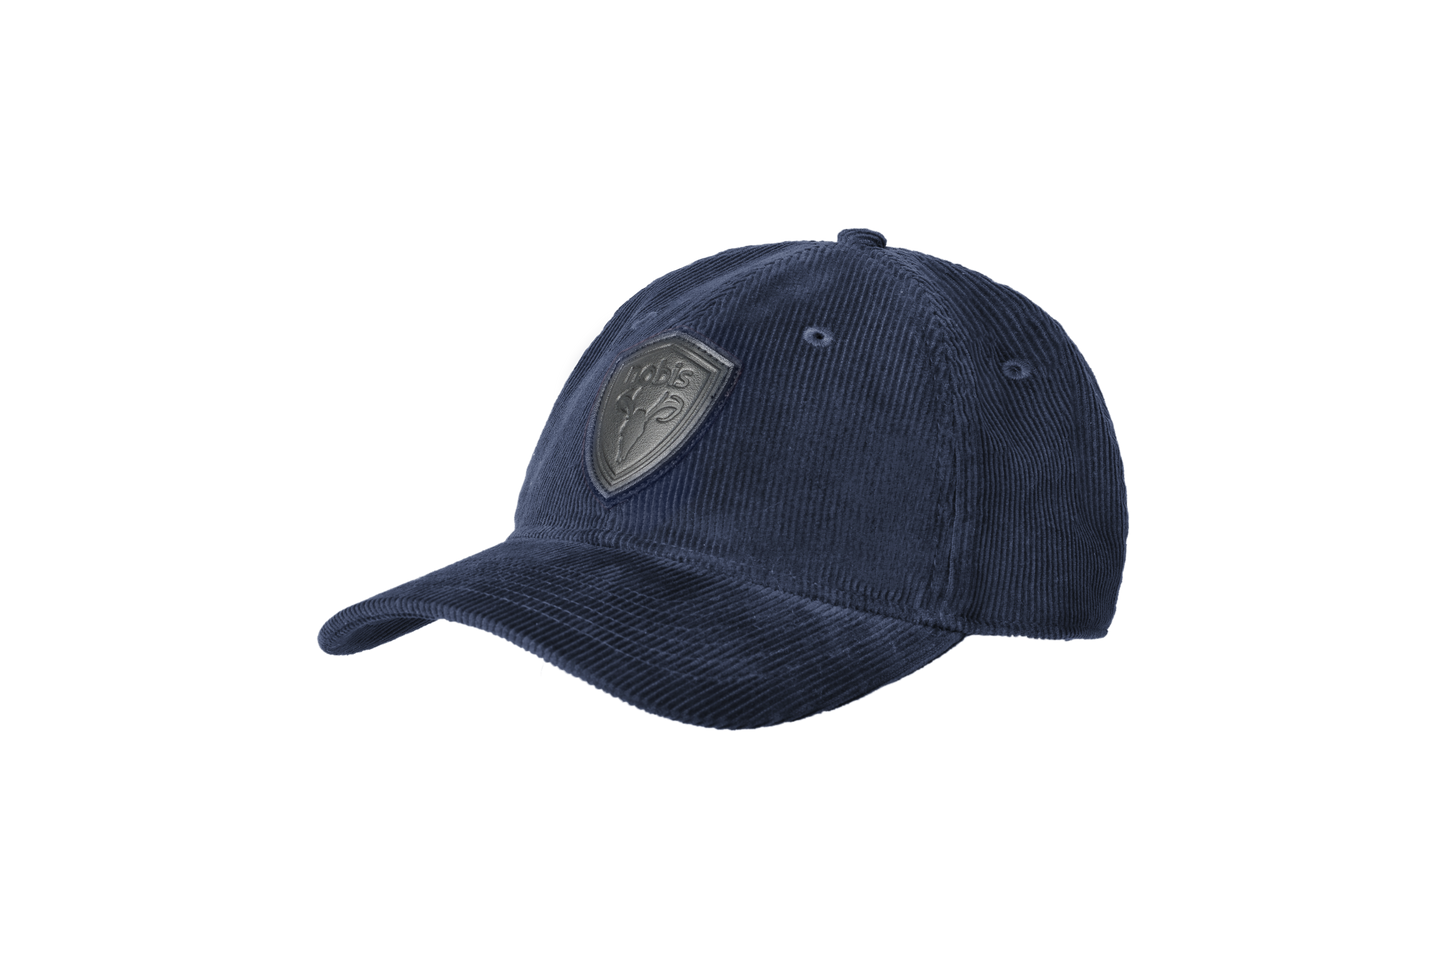 arter Unisex Tailored Ball Cap in 100% cotton corduroy, unstructured crown, curved brim, and leather strap back with metal buckle closure, in Navy